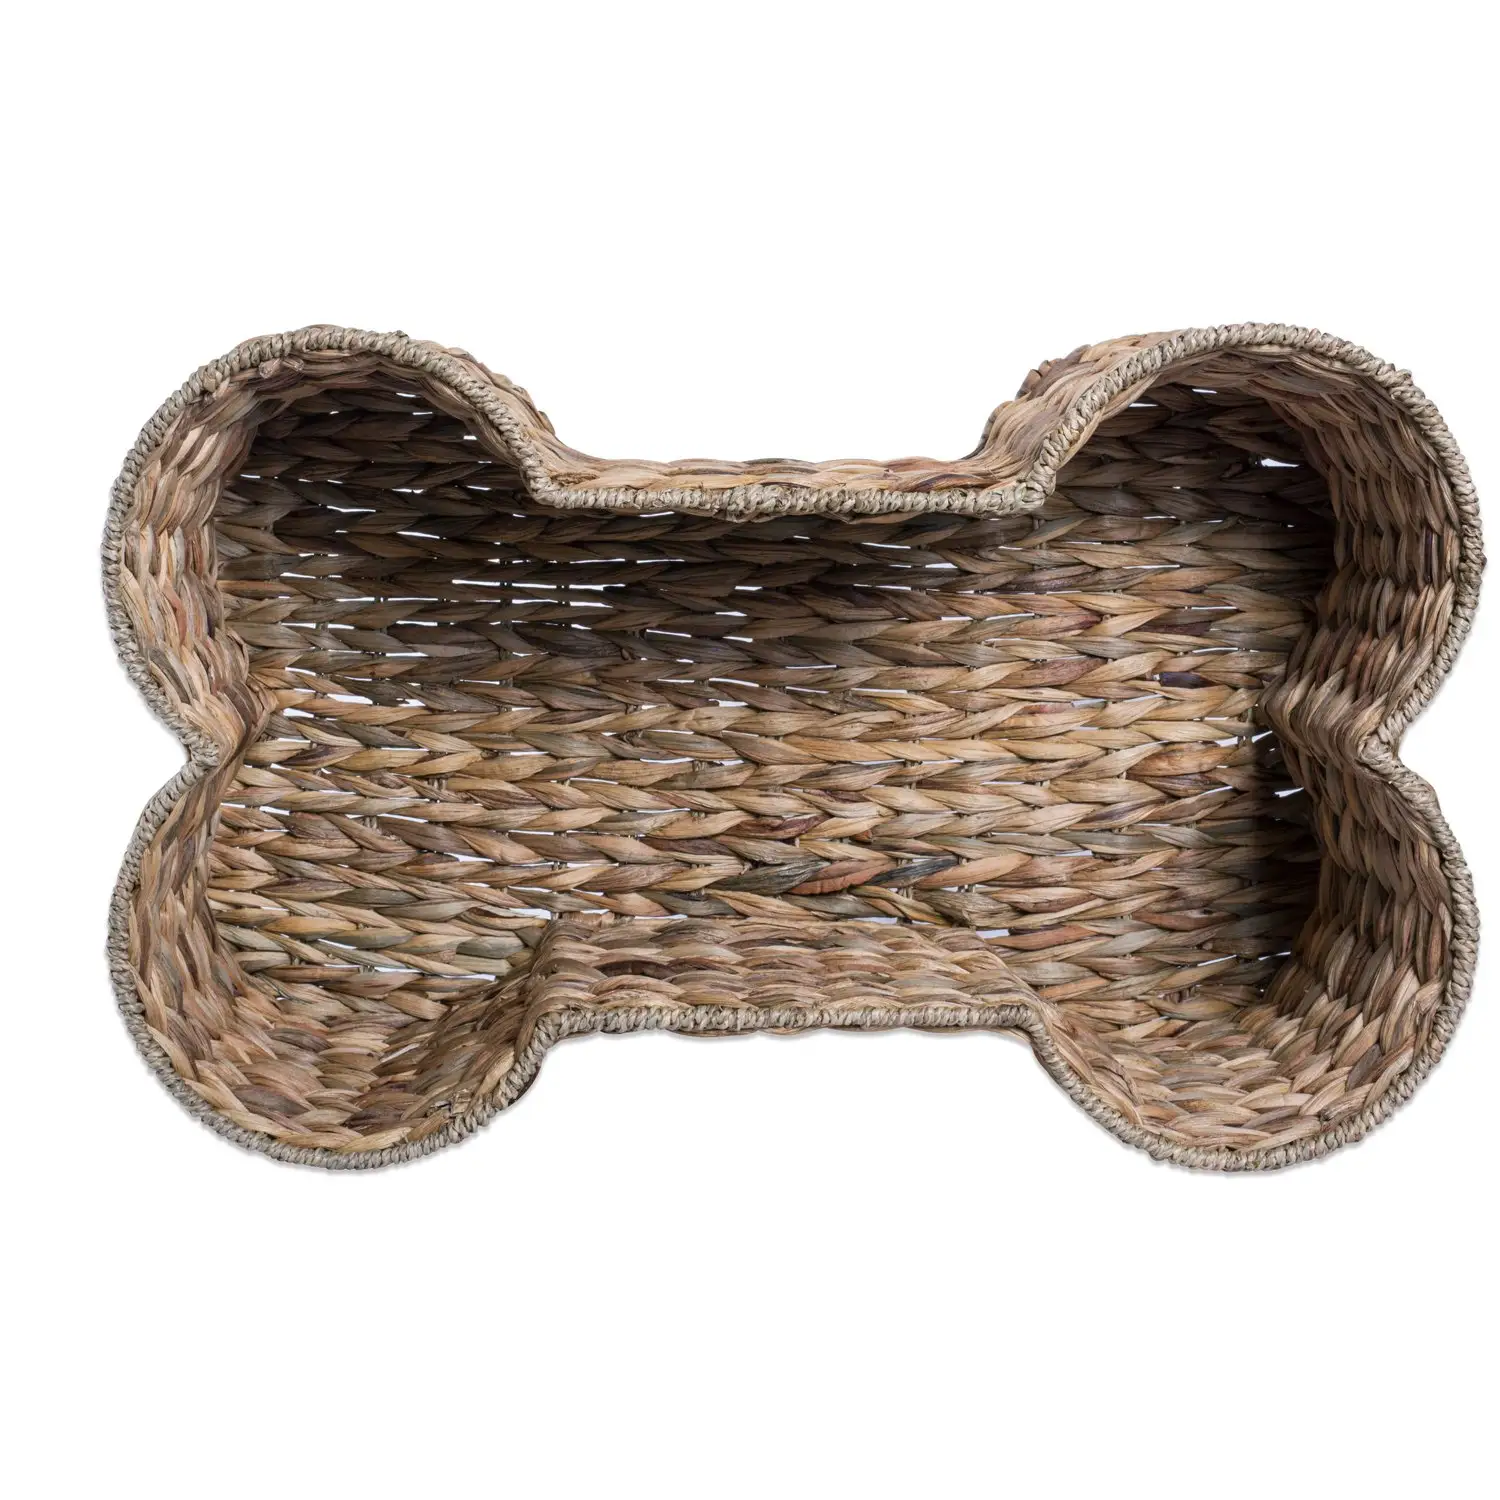 XH Bone Shape Pet Dog Toy Collection Handmade Dog and Cat Toy Bin Woven Storage water hyacinth baskets